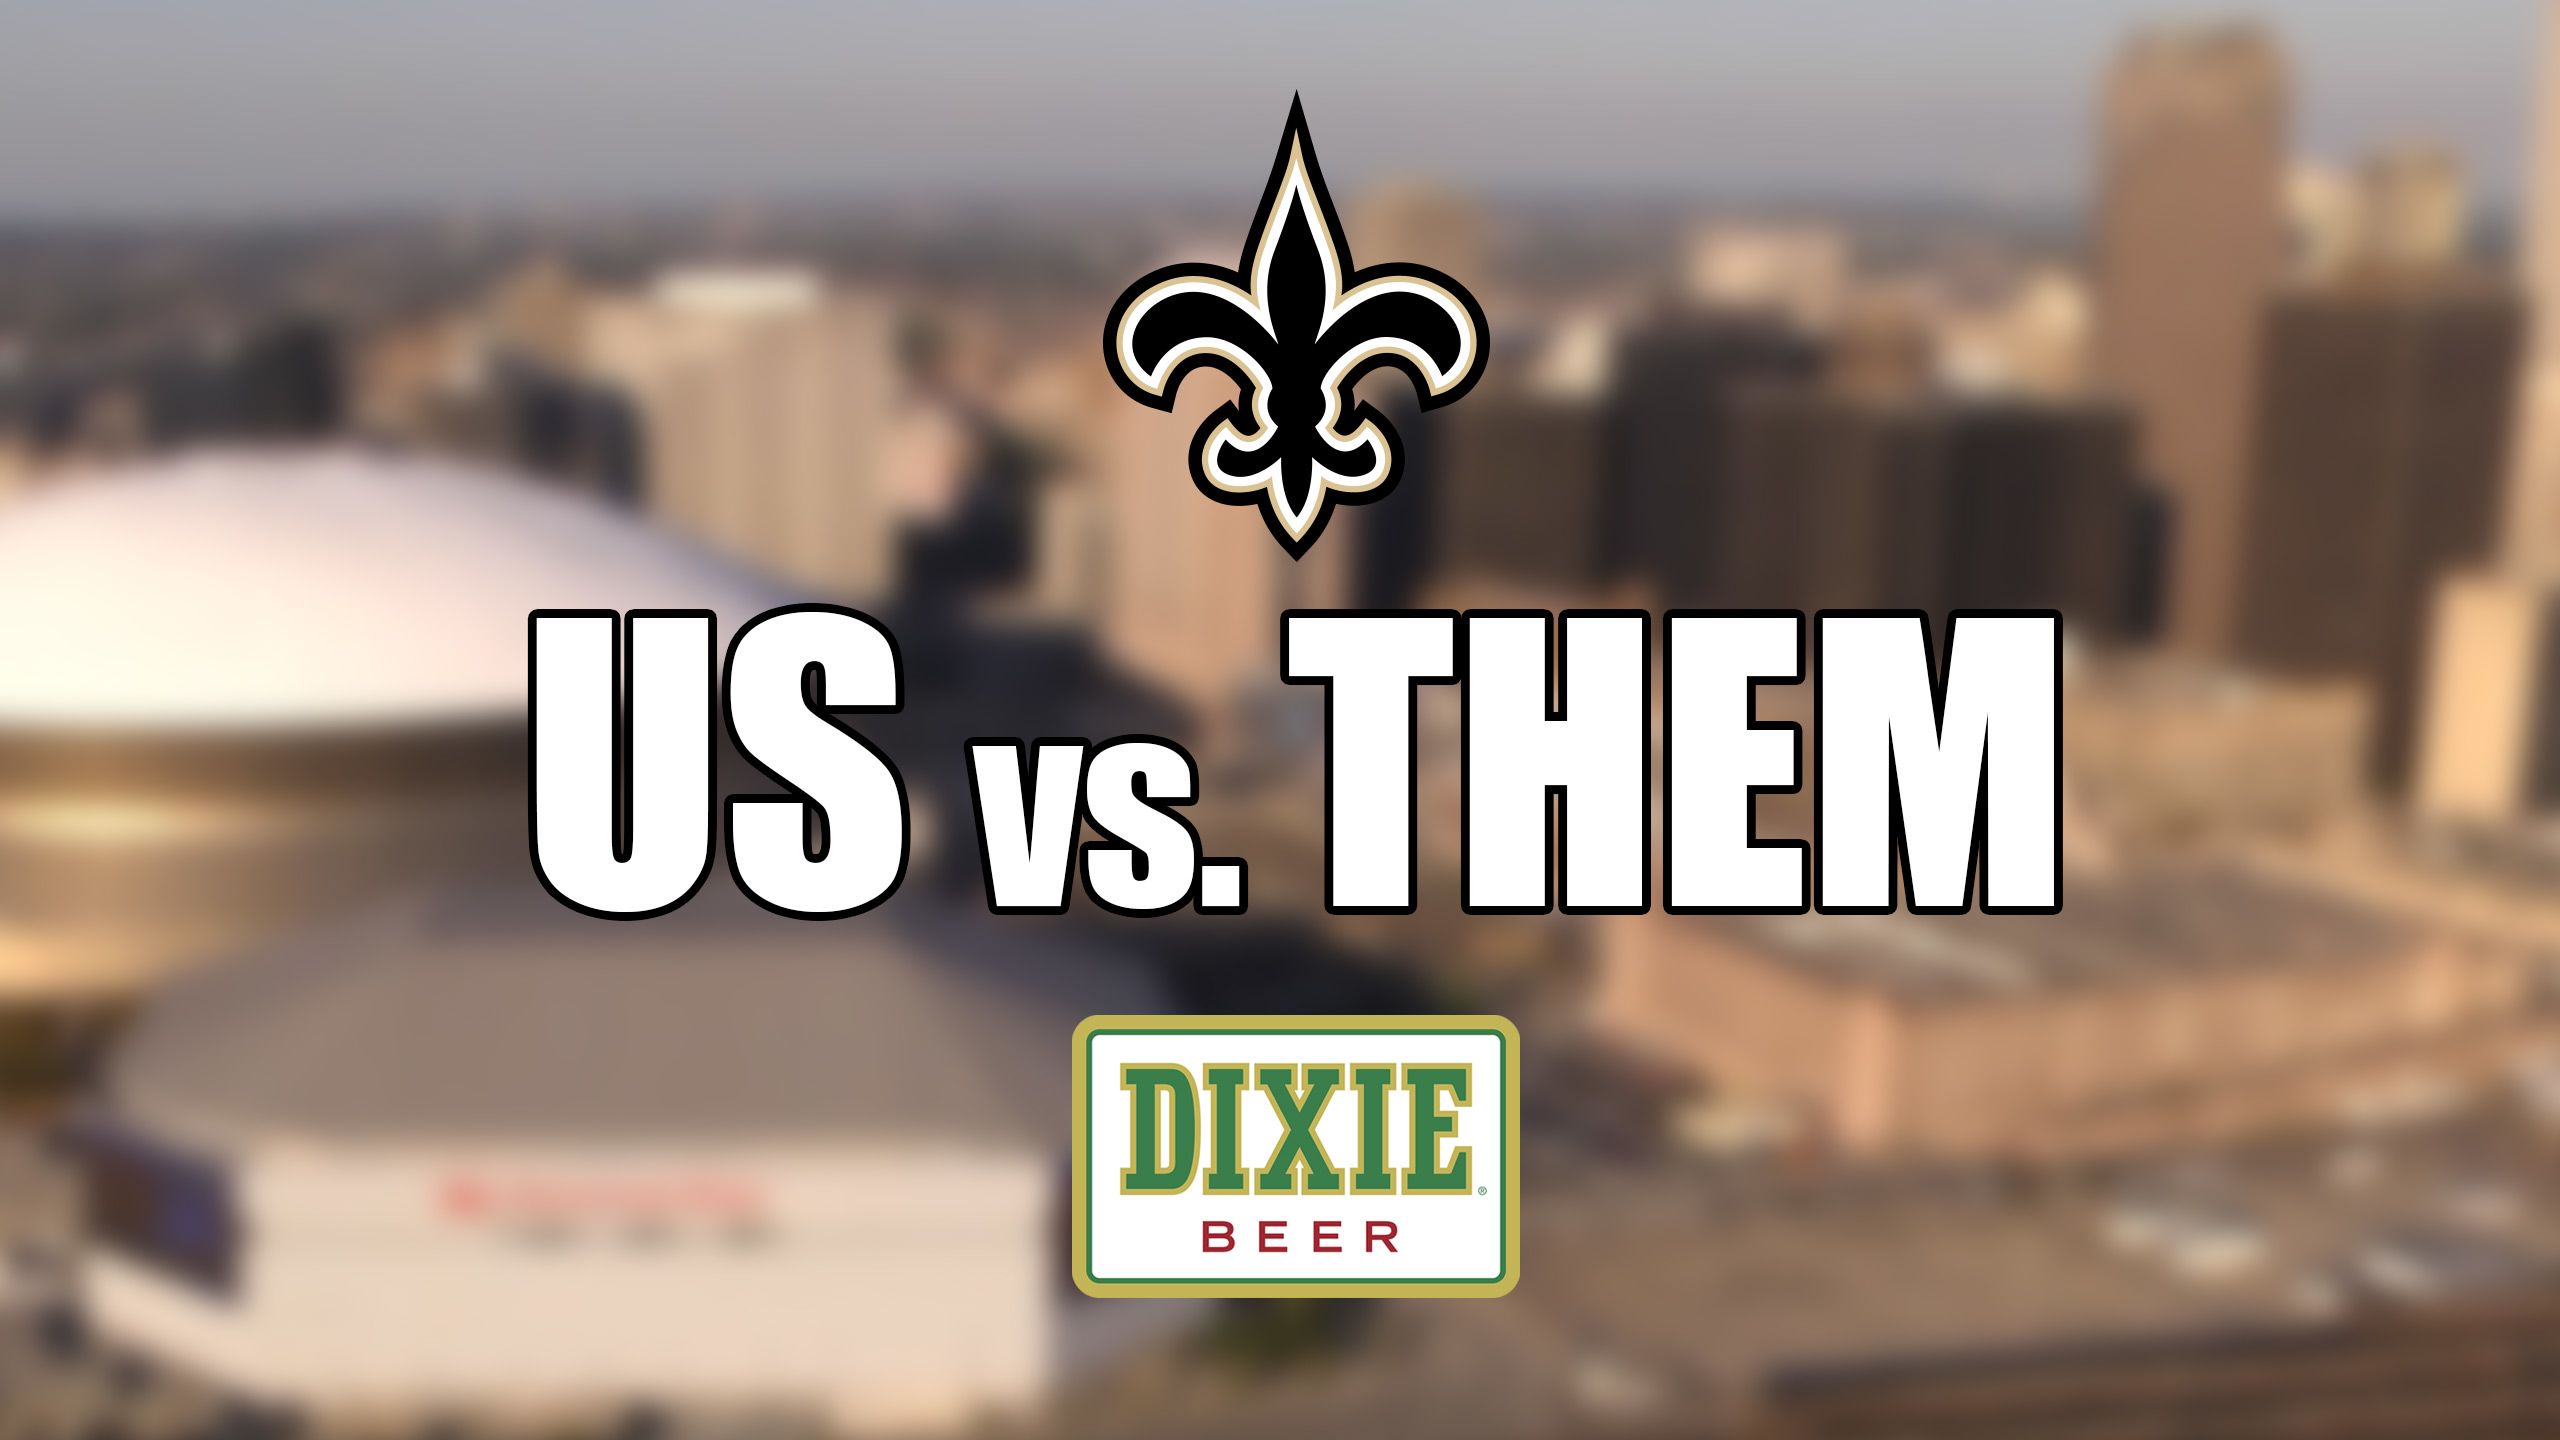 New Orleans Saints on X: You came to us at our lowest point. You led us to  our highest. You represented our state, city, and team with incredible  professionalism, class, and toughness.